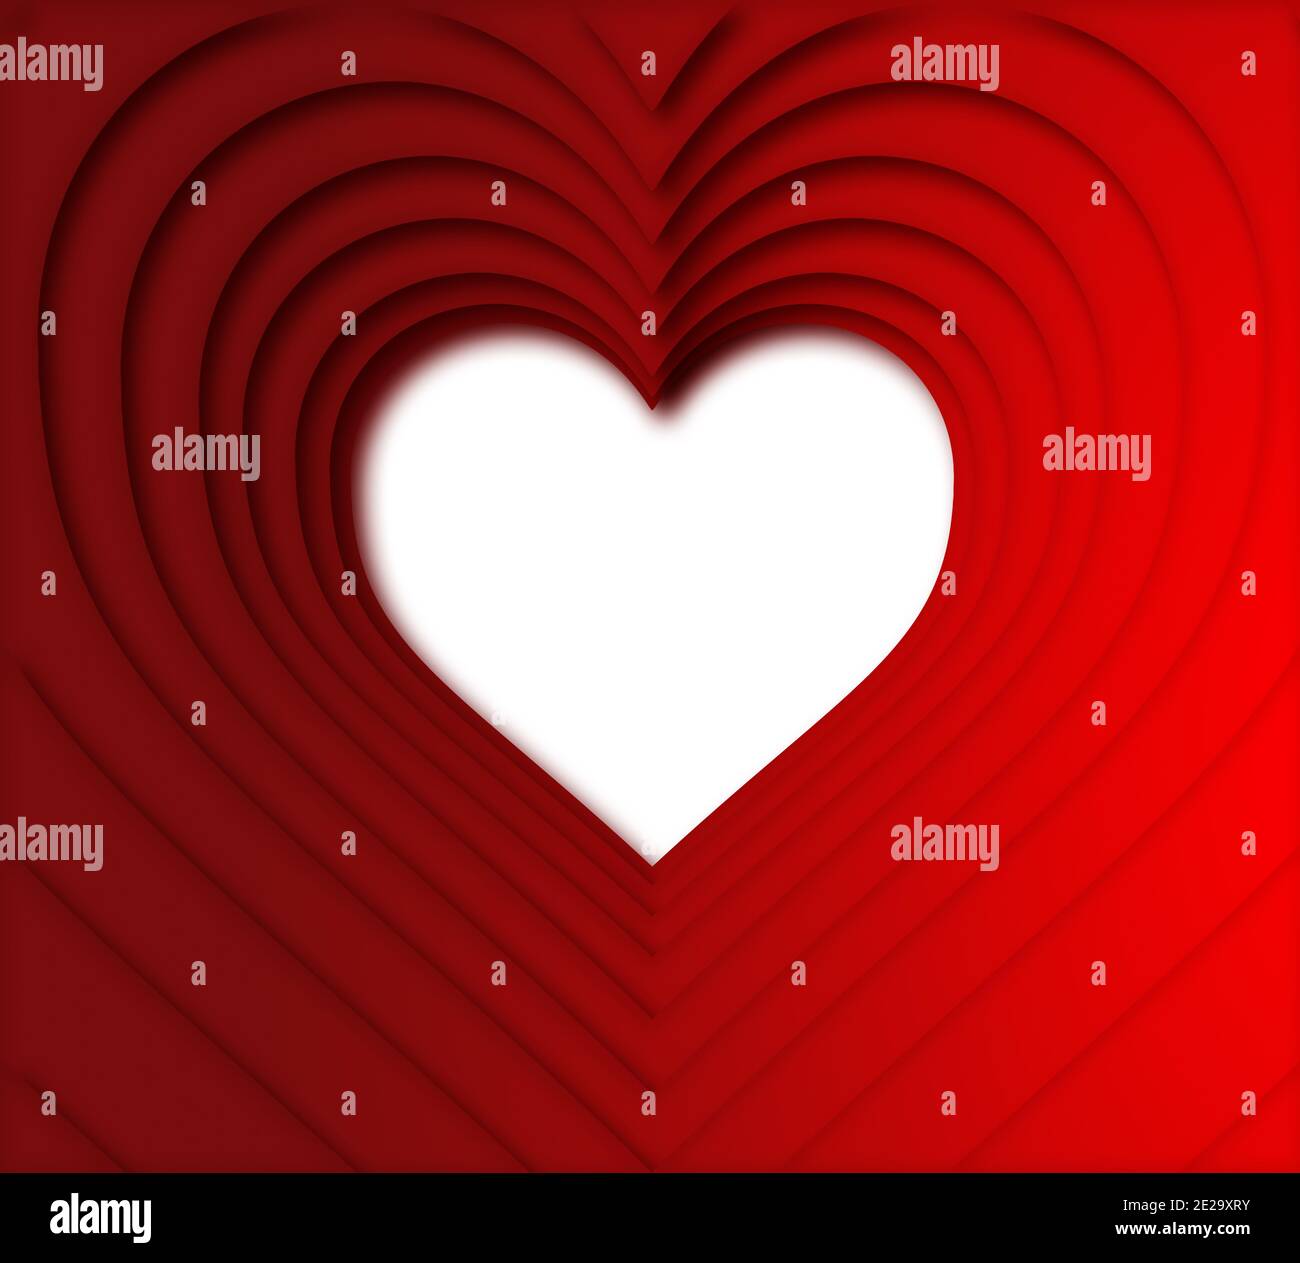 Cutouts of hearts on a red base placed concentrically with white background. Square composition. Stock Photo